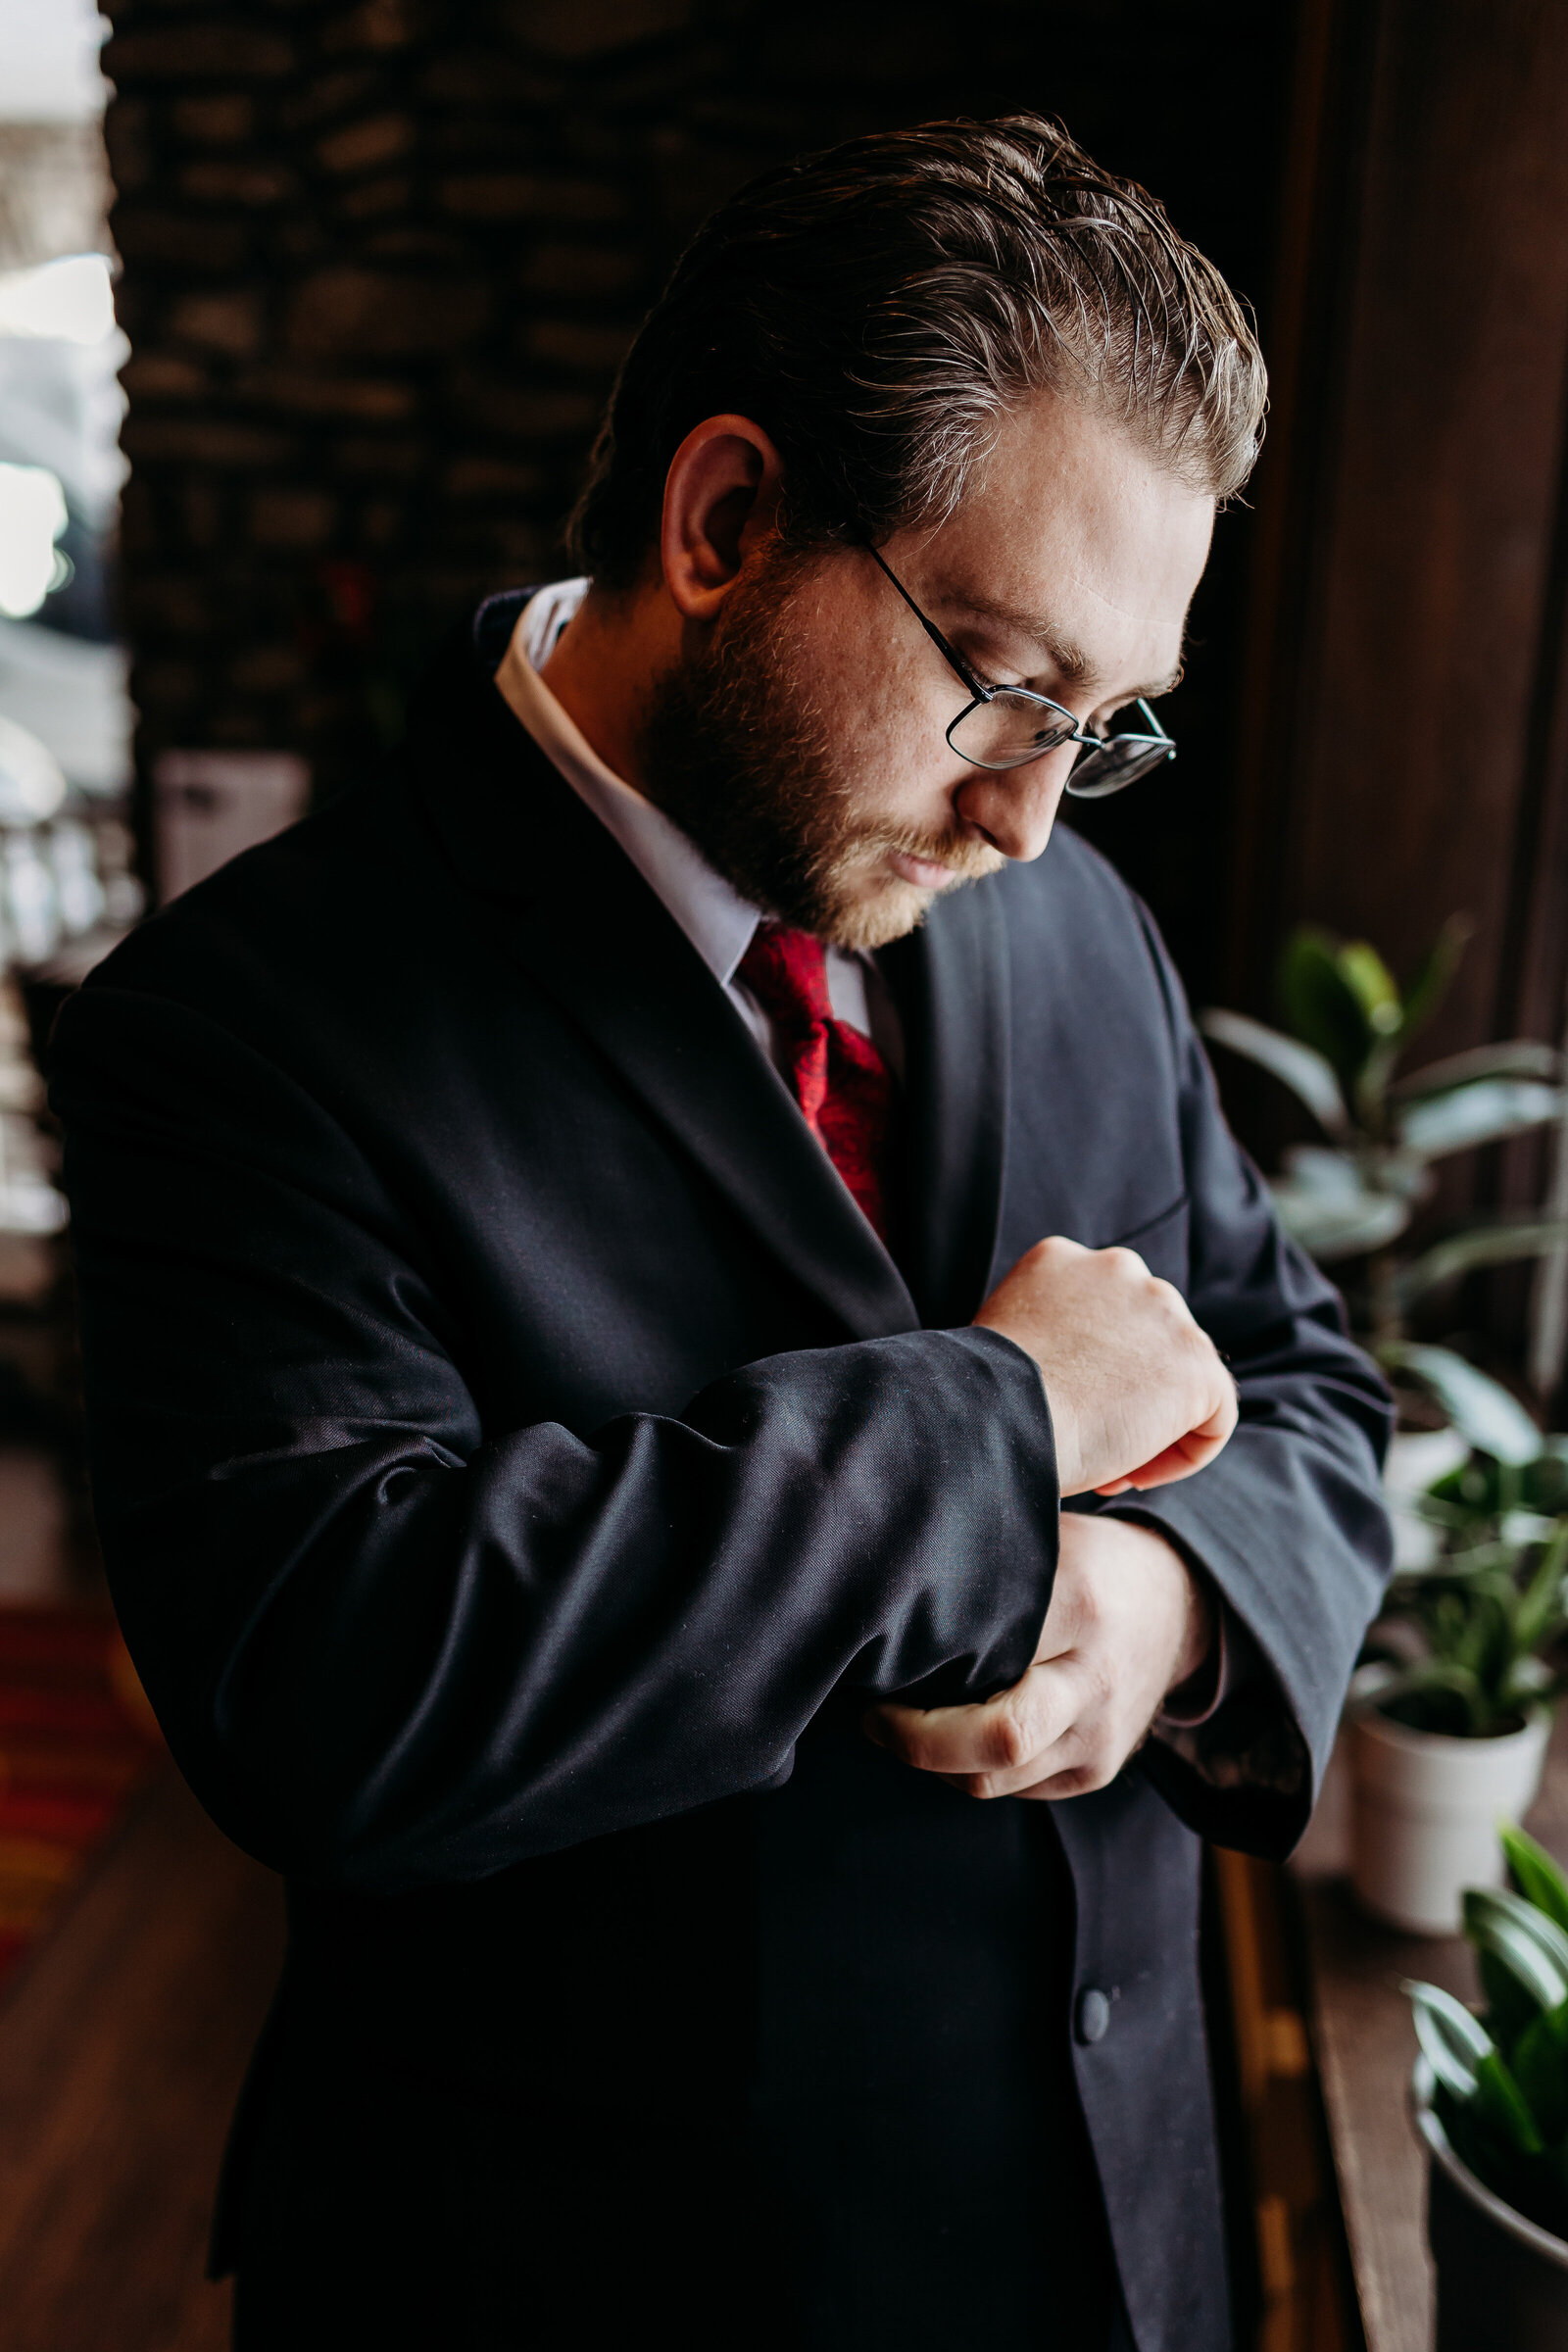 Groom fixes cuff of his jacket while getting ready for his wedding day